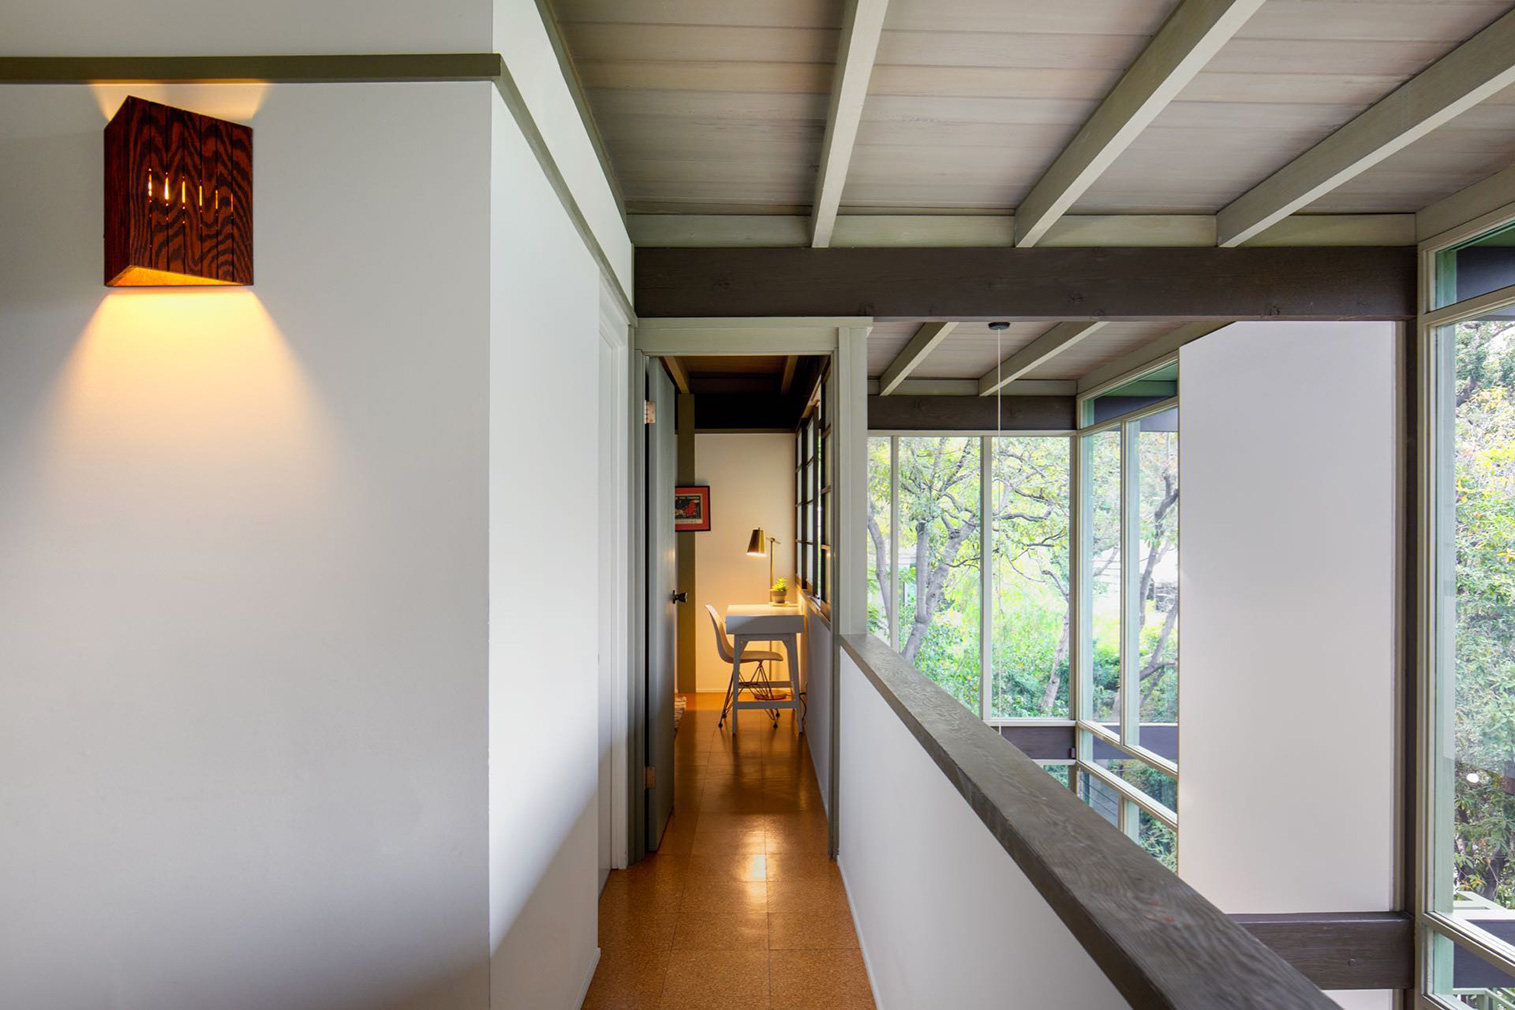 Pasadena post-and-beam by Case Study architects Buff, Straub & Hensman is for sale